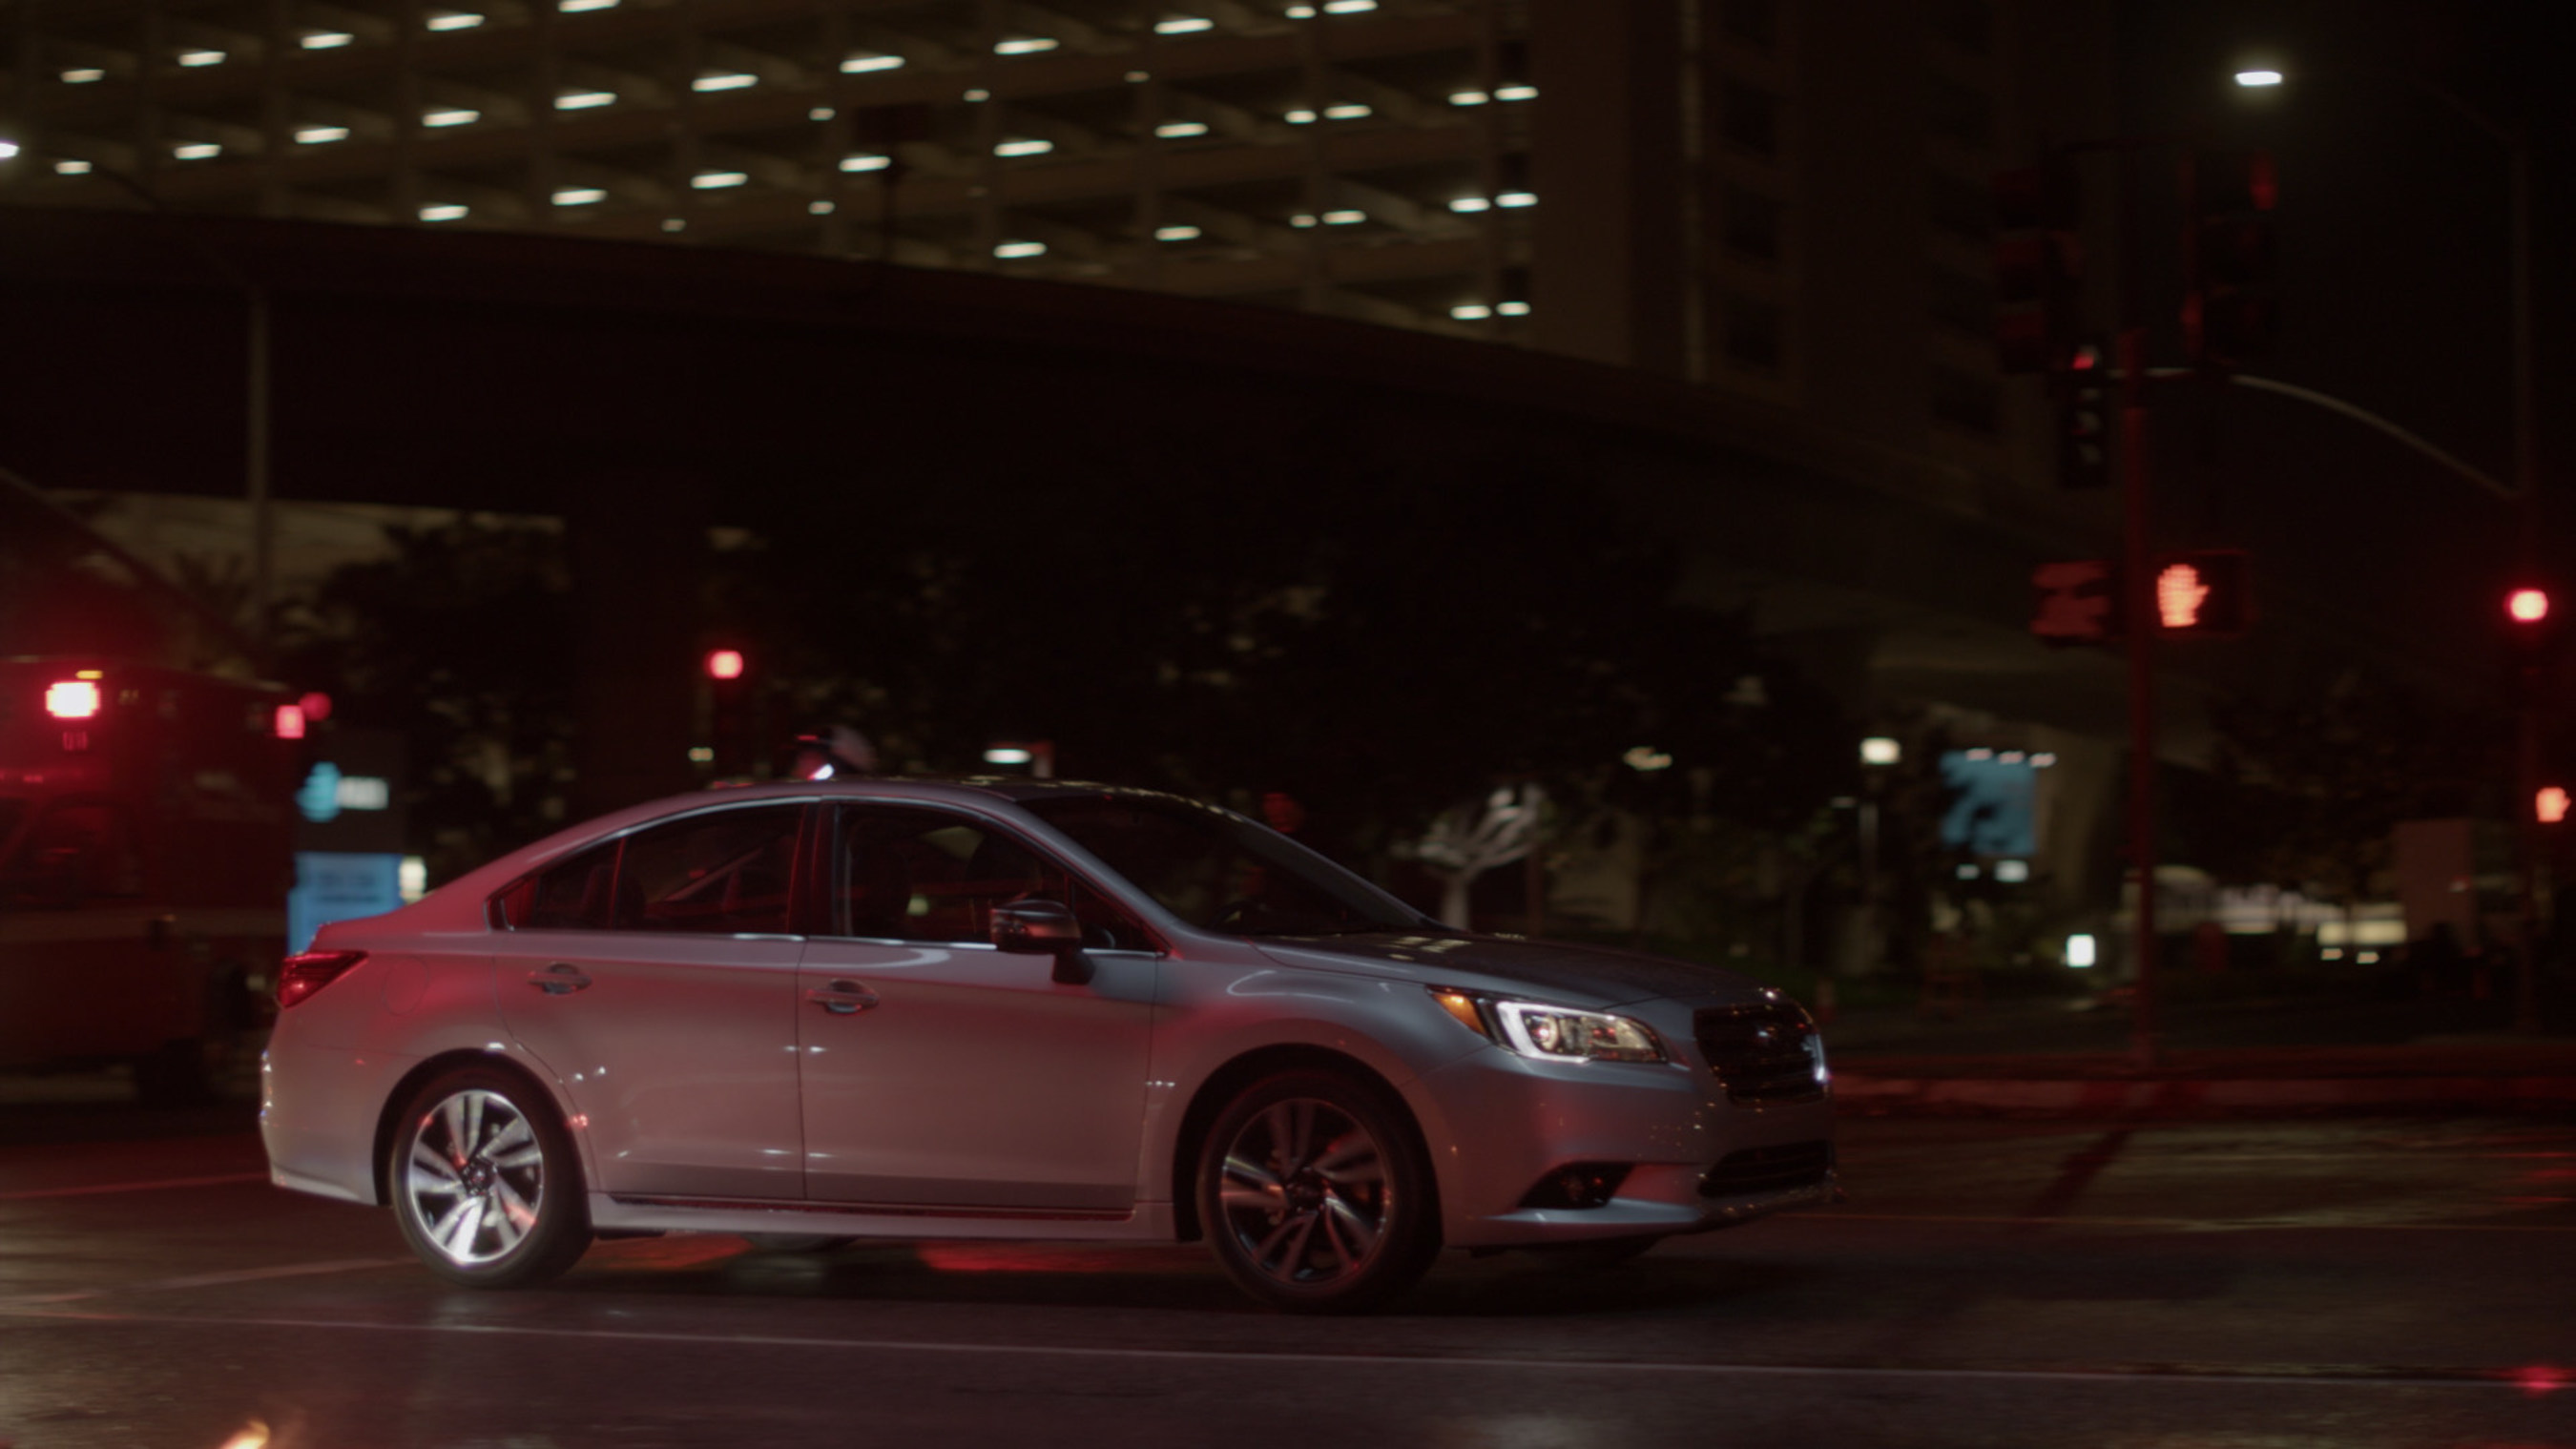 Subaru Puts Safety First: New Television Spots Reinforce Brand's Commitment to Keeping Drivers and Their Families Safe on the Road